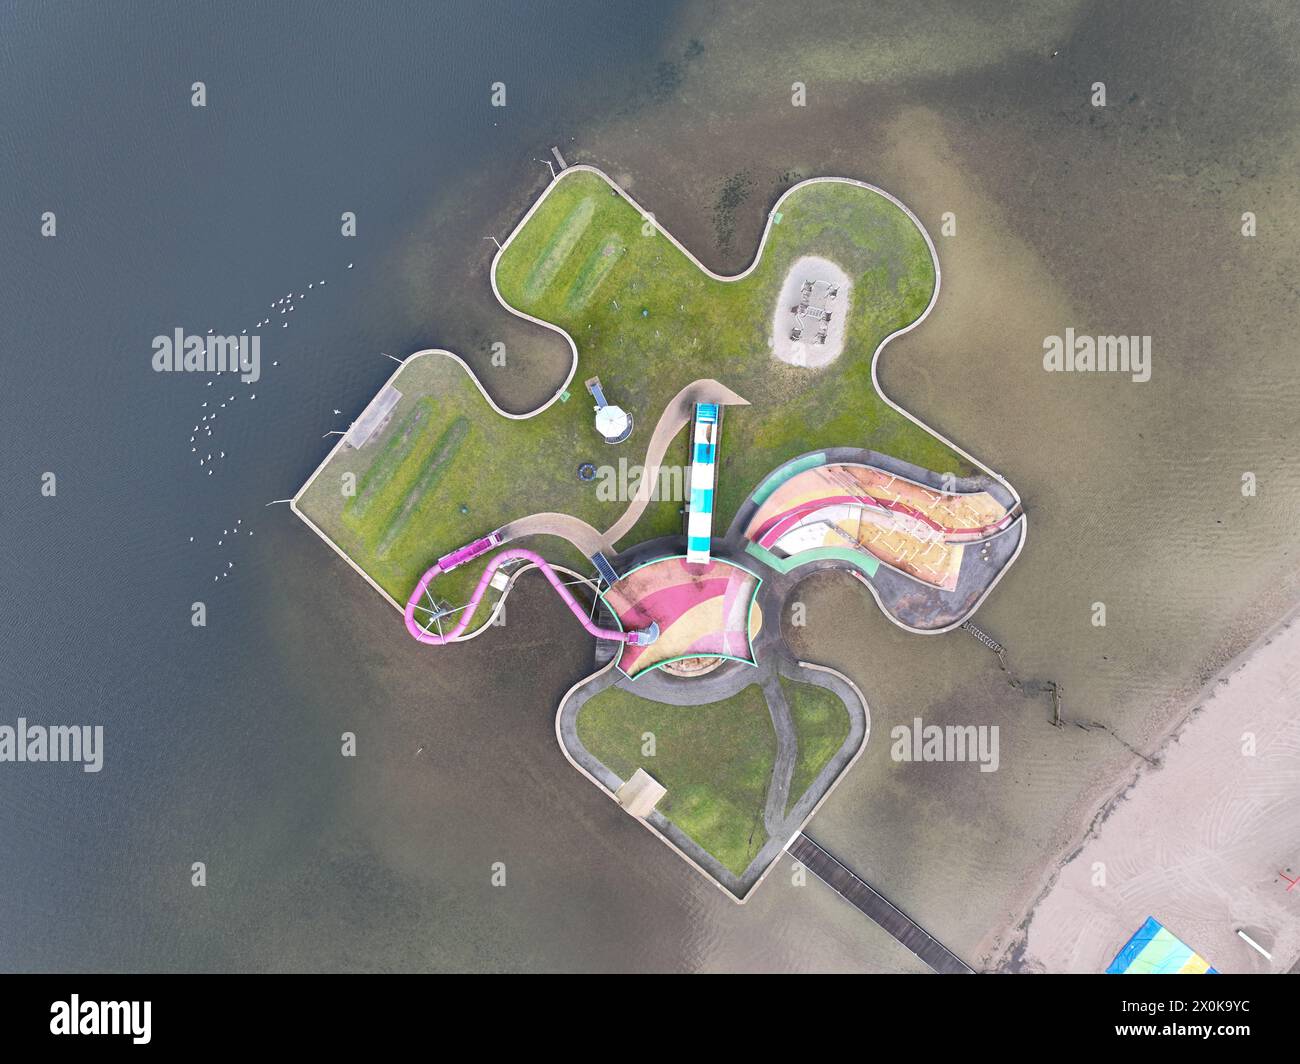 Children recreational playground, playfull colors, climbing rack, slide and other attributes on a puzzle piece on water. Aerial drone view. Stock Photo